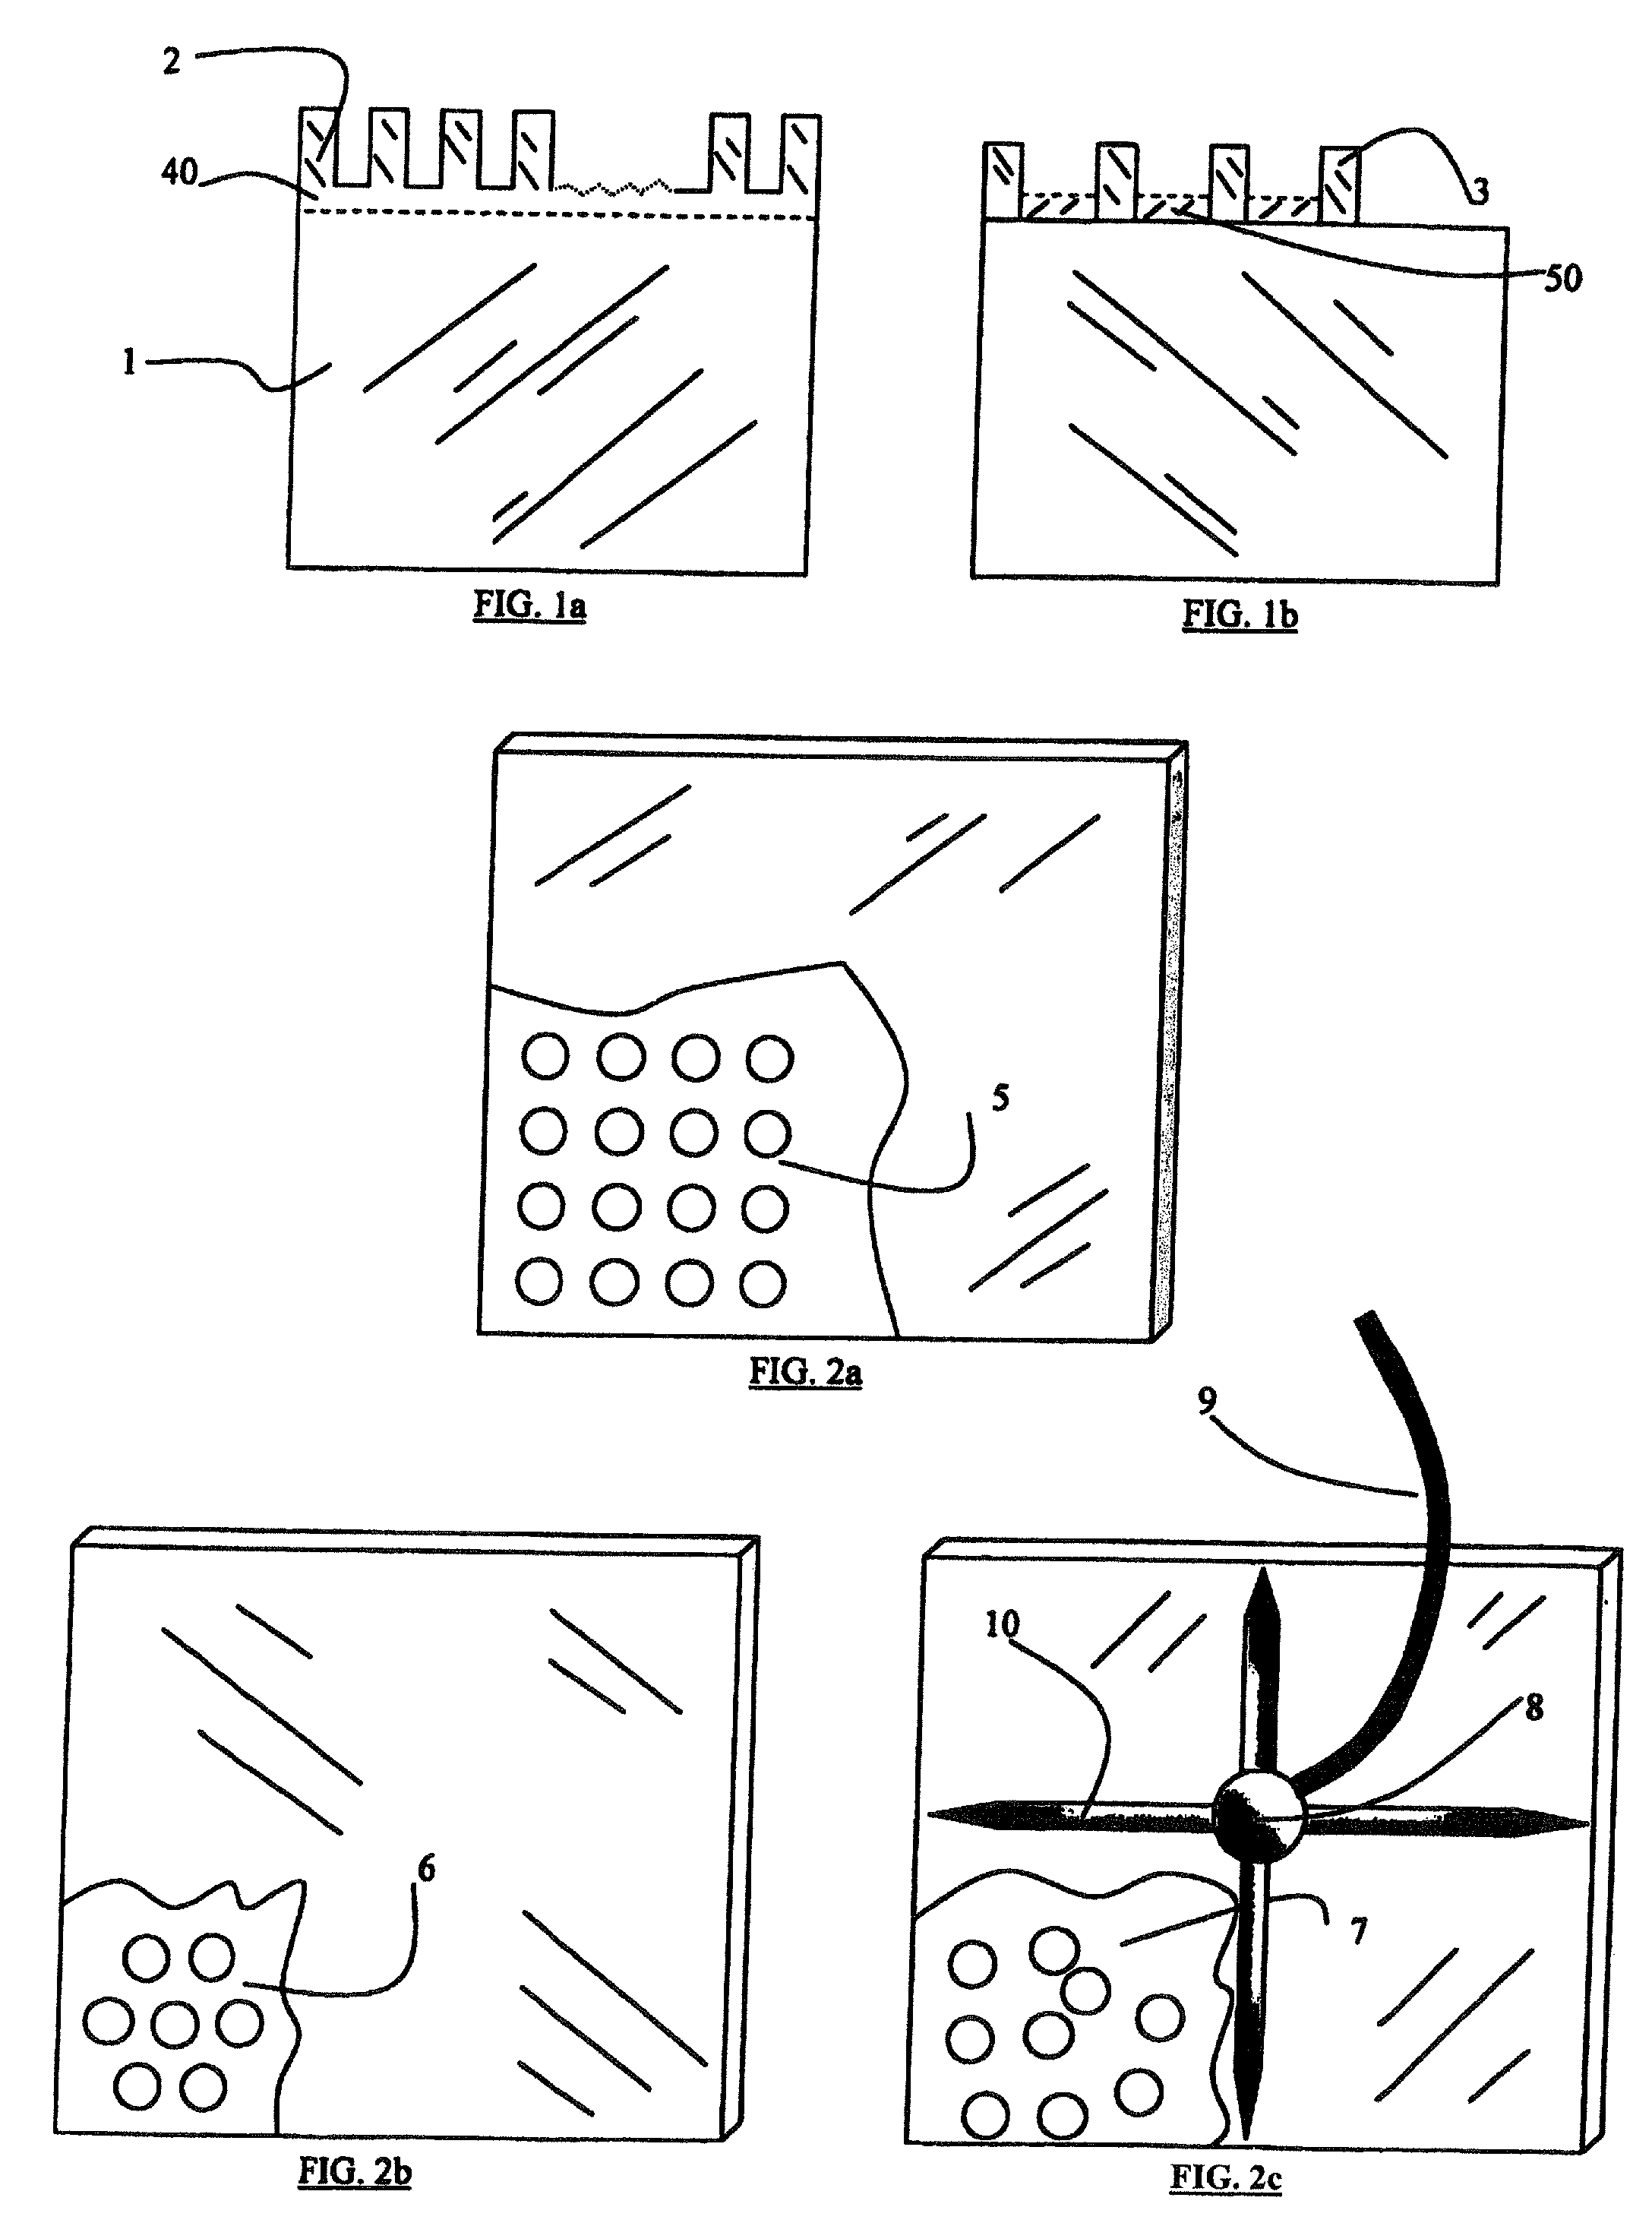 High-efficiency illumination in data collection devices